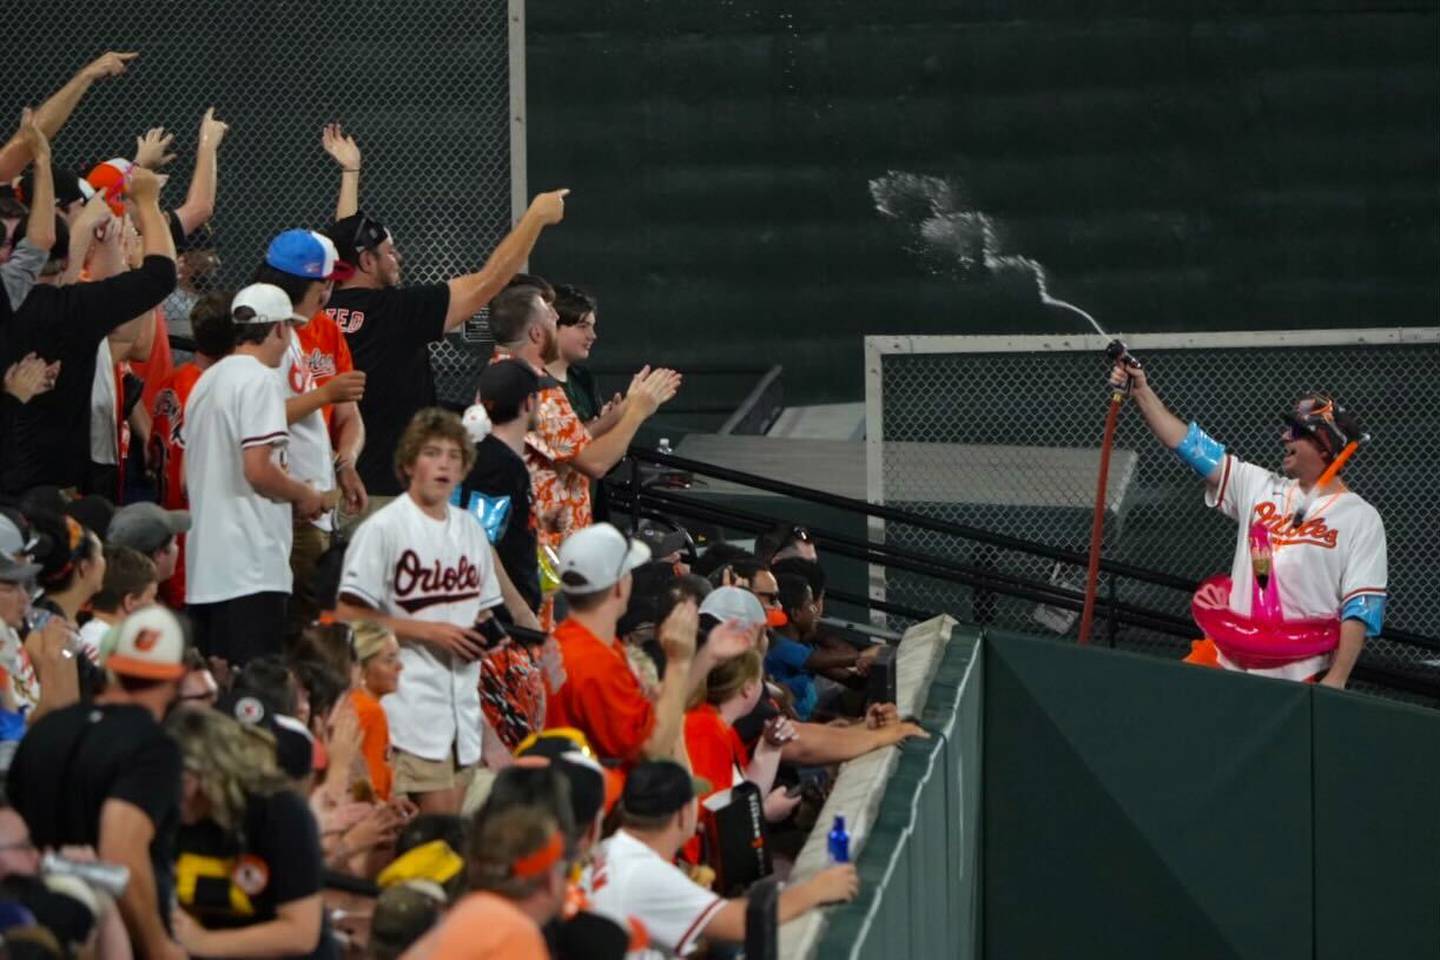 “Mr. Splash” soaks Orioles fans with a garden hose in the Bird Bath section the team debuted Friday night against the Pirates. Fans in this section will get splashed every time the Orioles double, triple, homer or score a run.